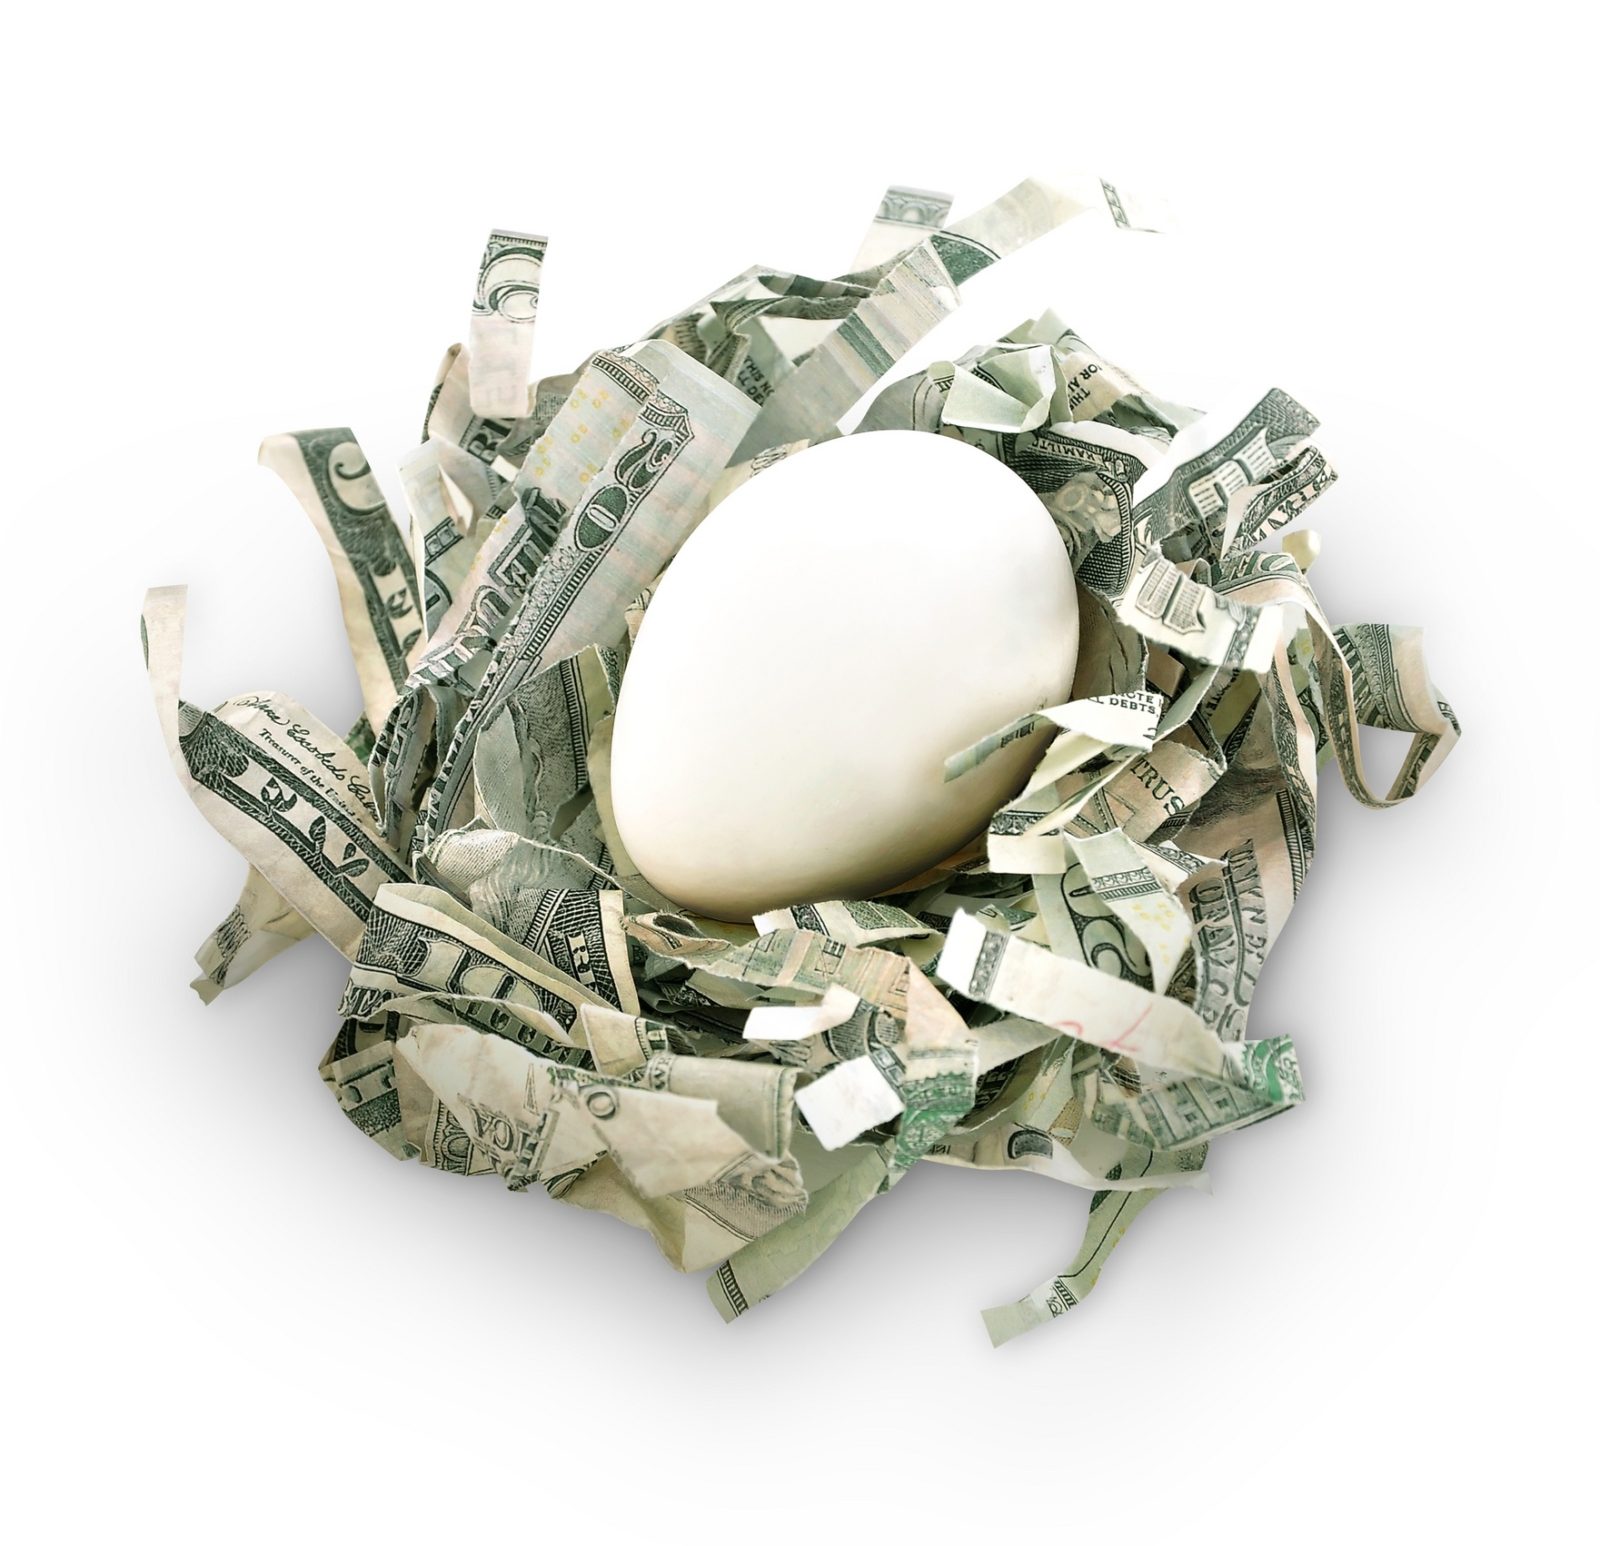 Before Caregiving Puts a Crack in Your Nest Egg – Find a Financial Gerontologist